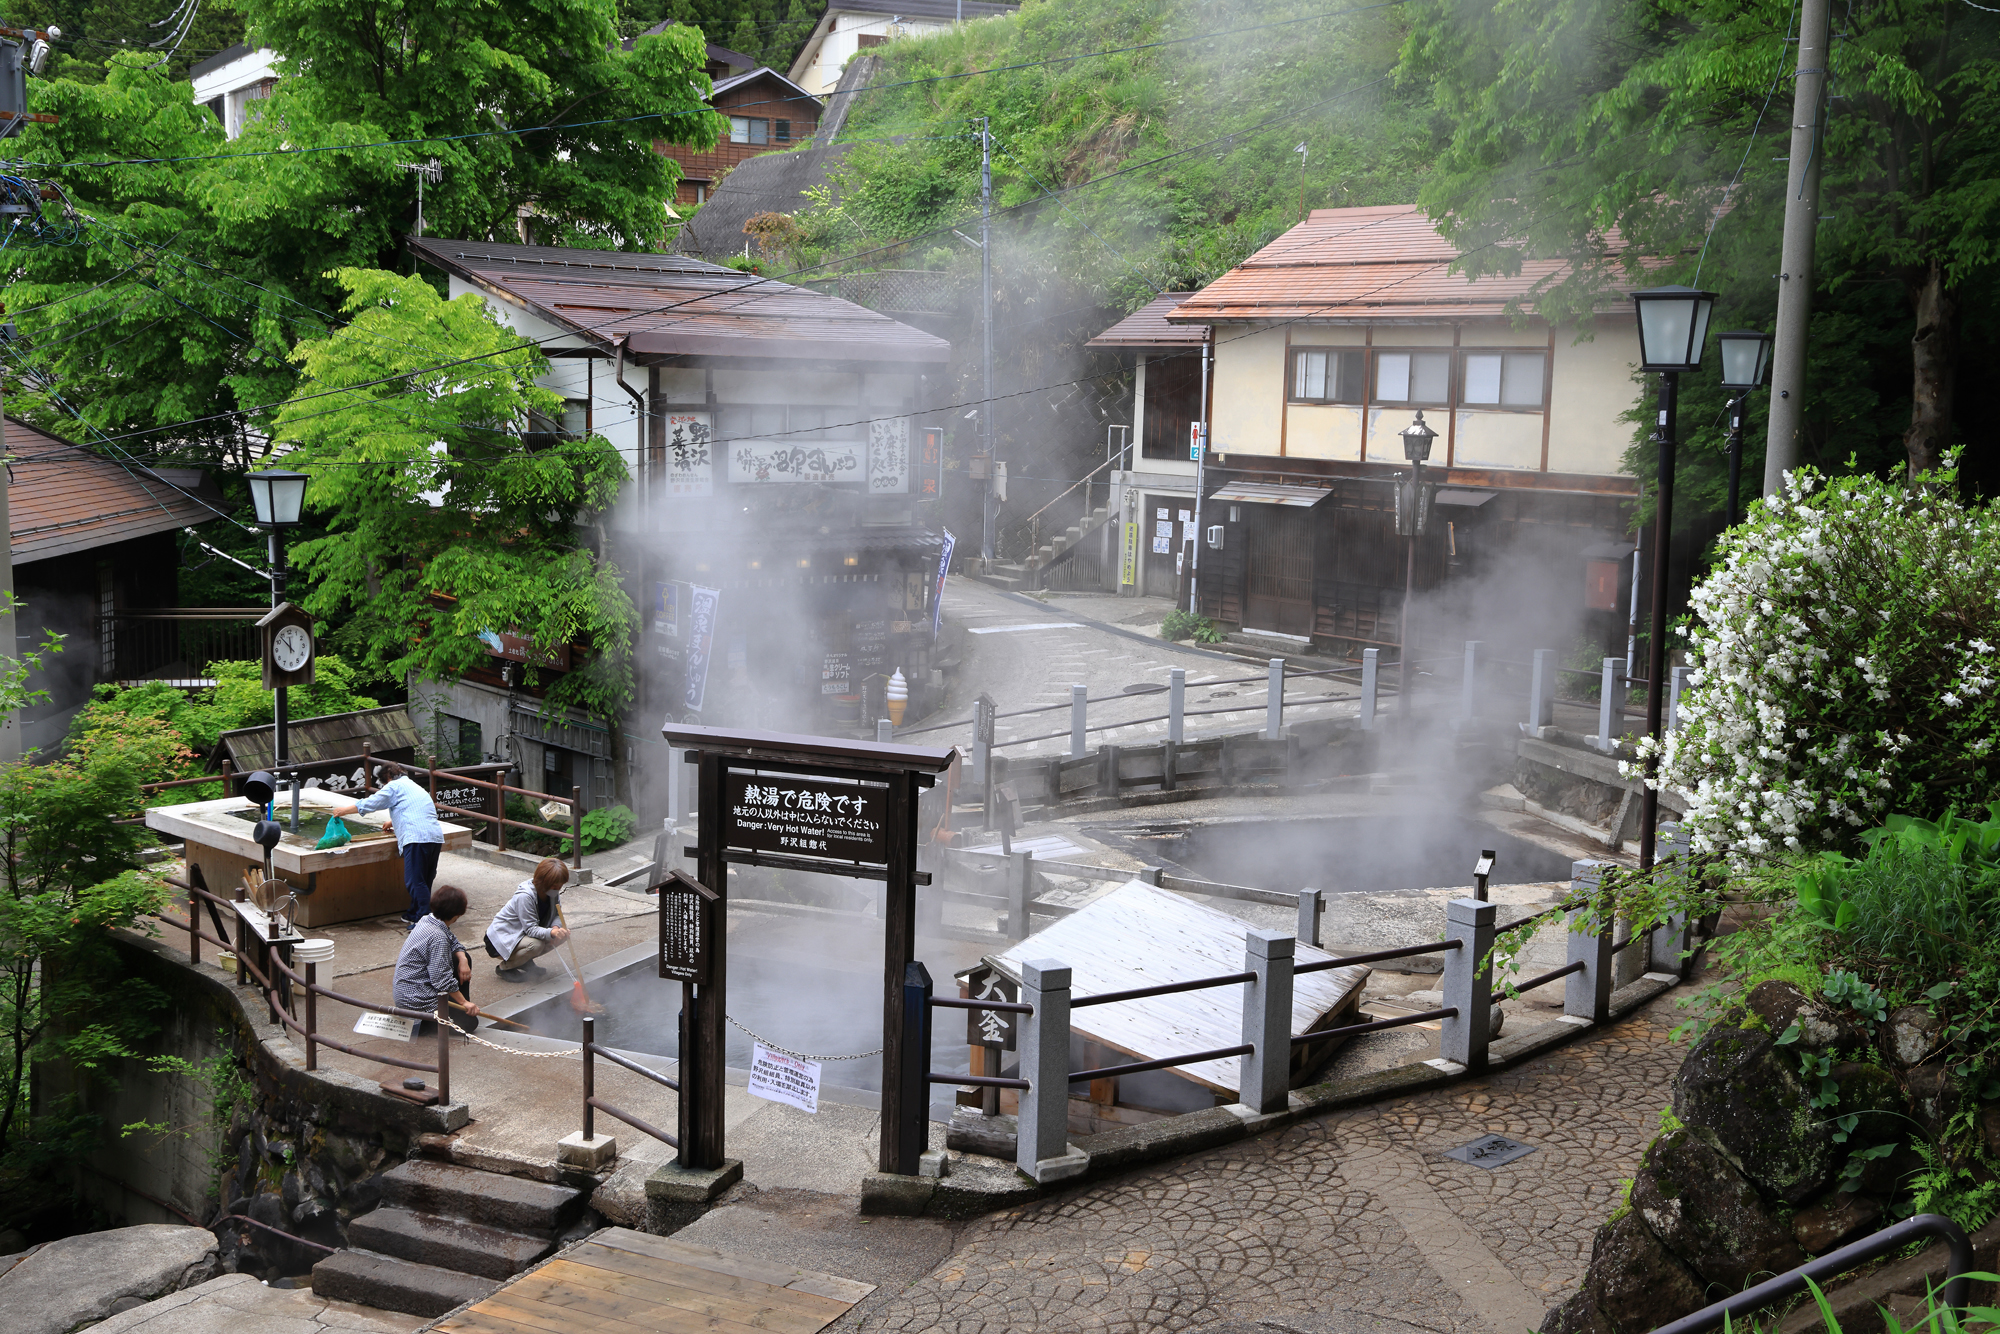 Hotspring cooking and bathing